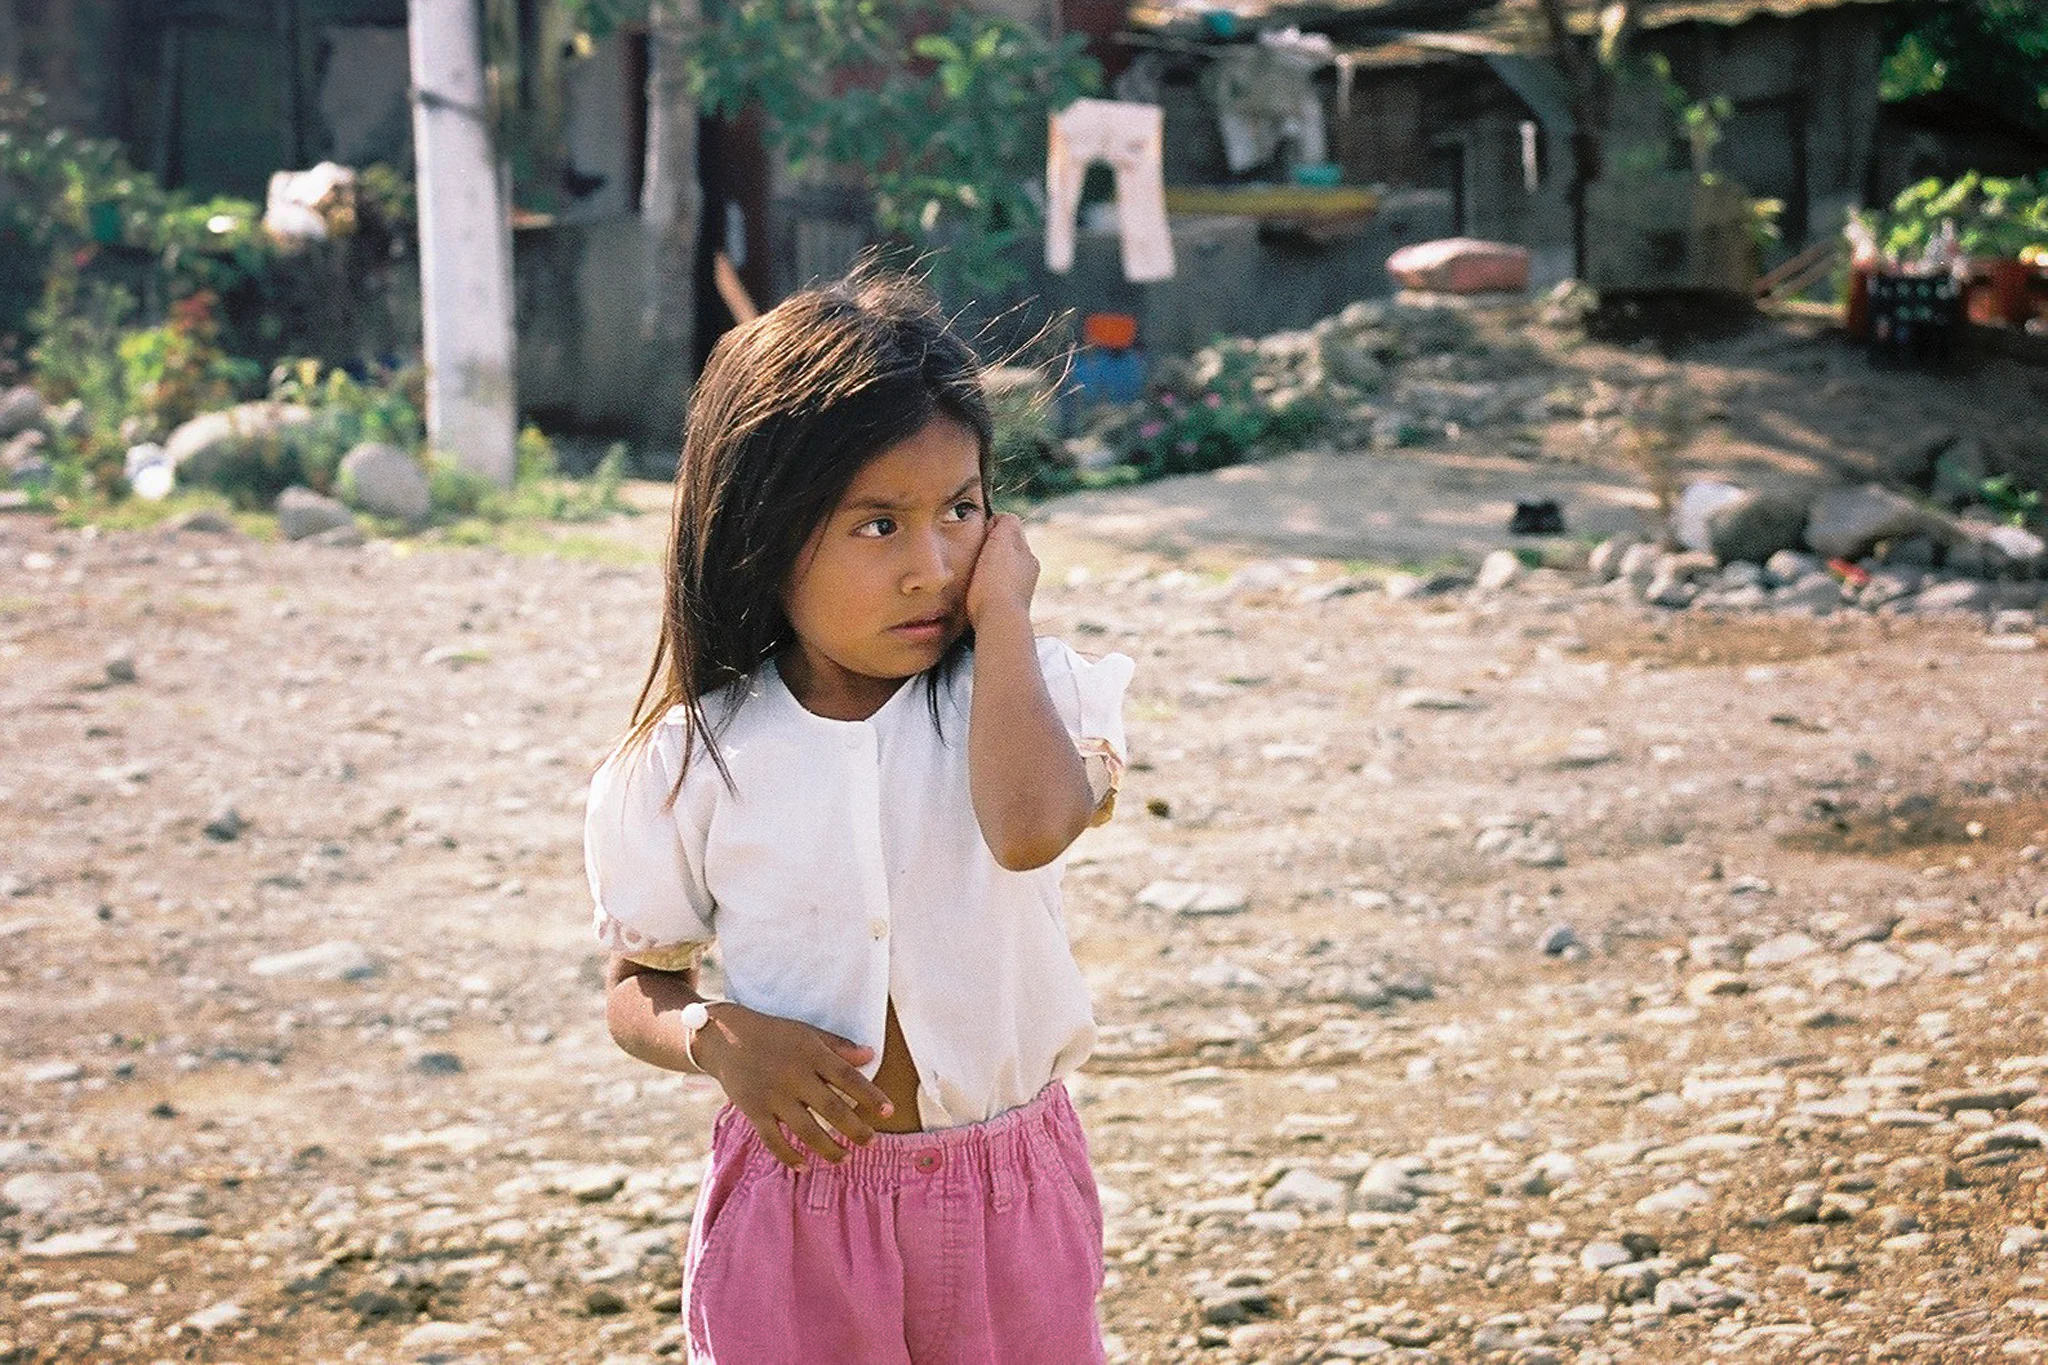 Orphaids looks after vulnerable children in Ecuador and Colombia